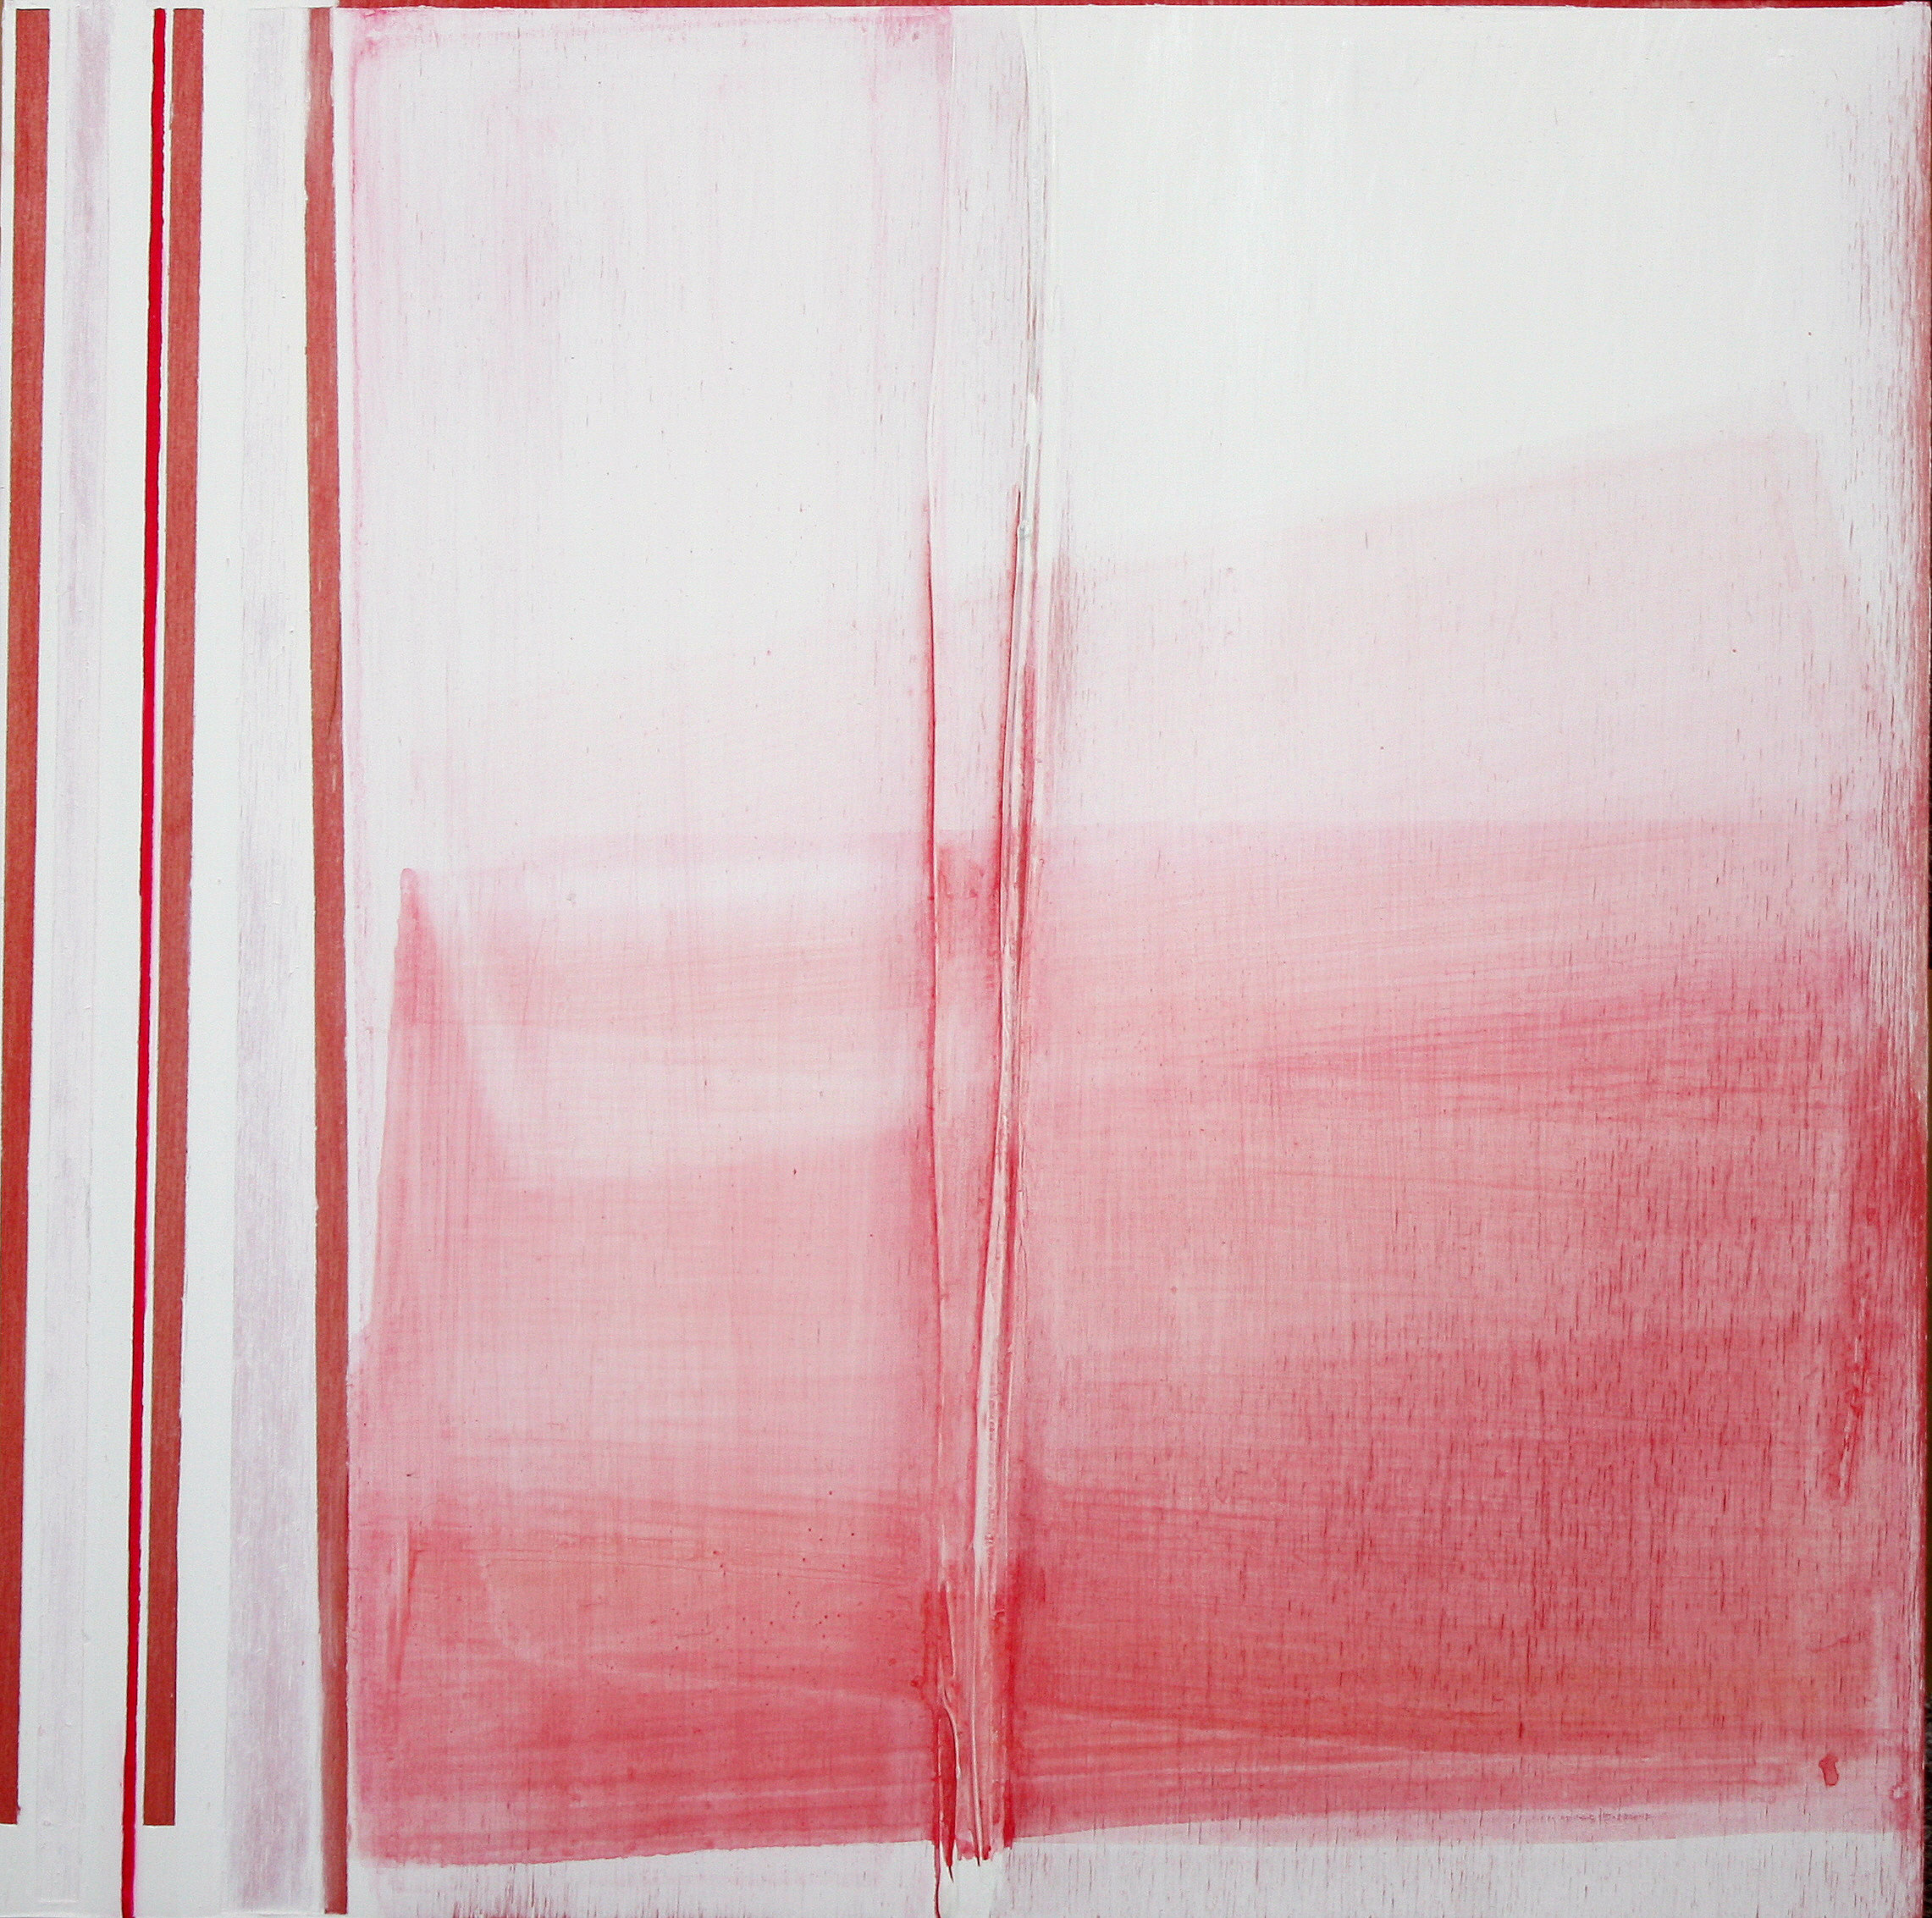 Untitled (red white), 2012